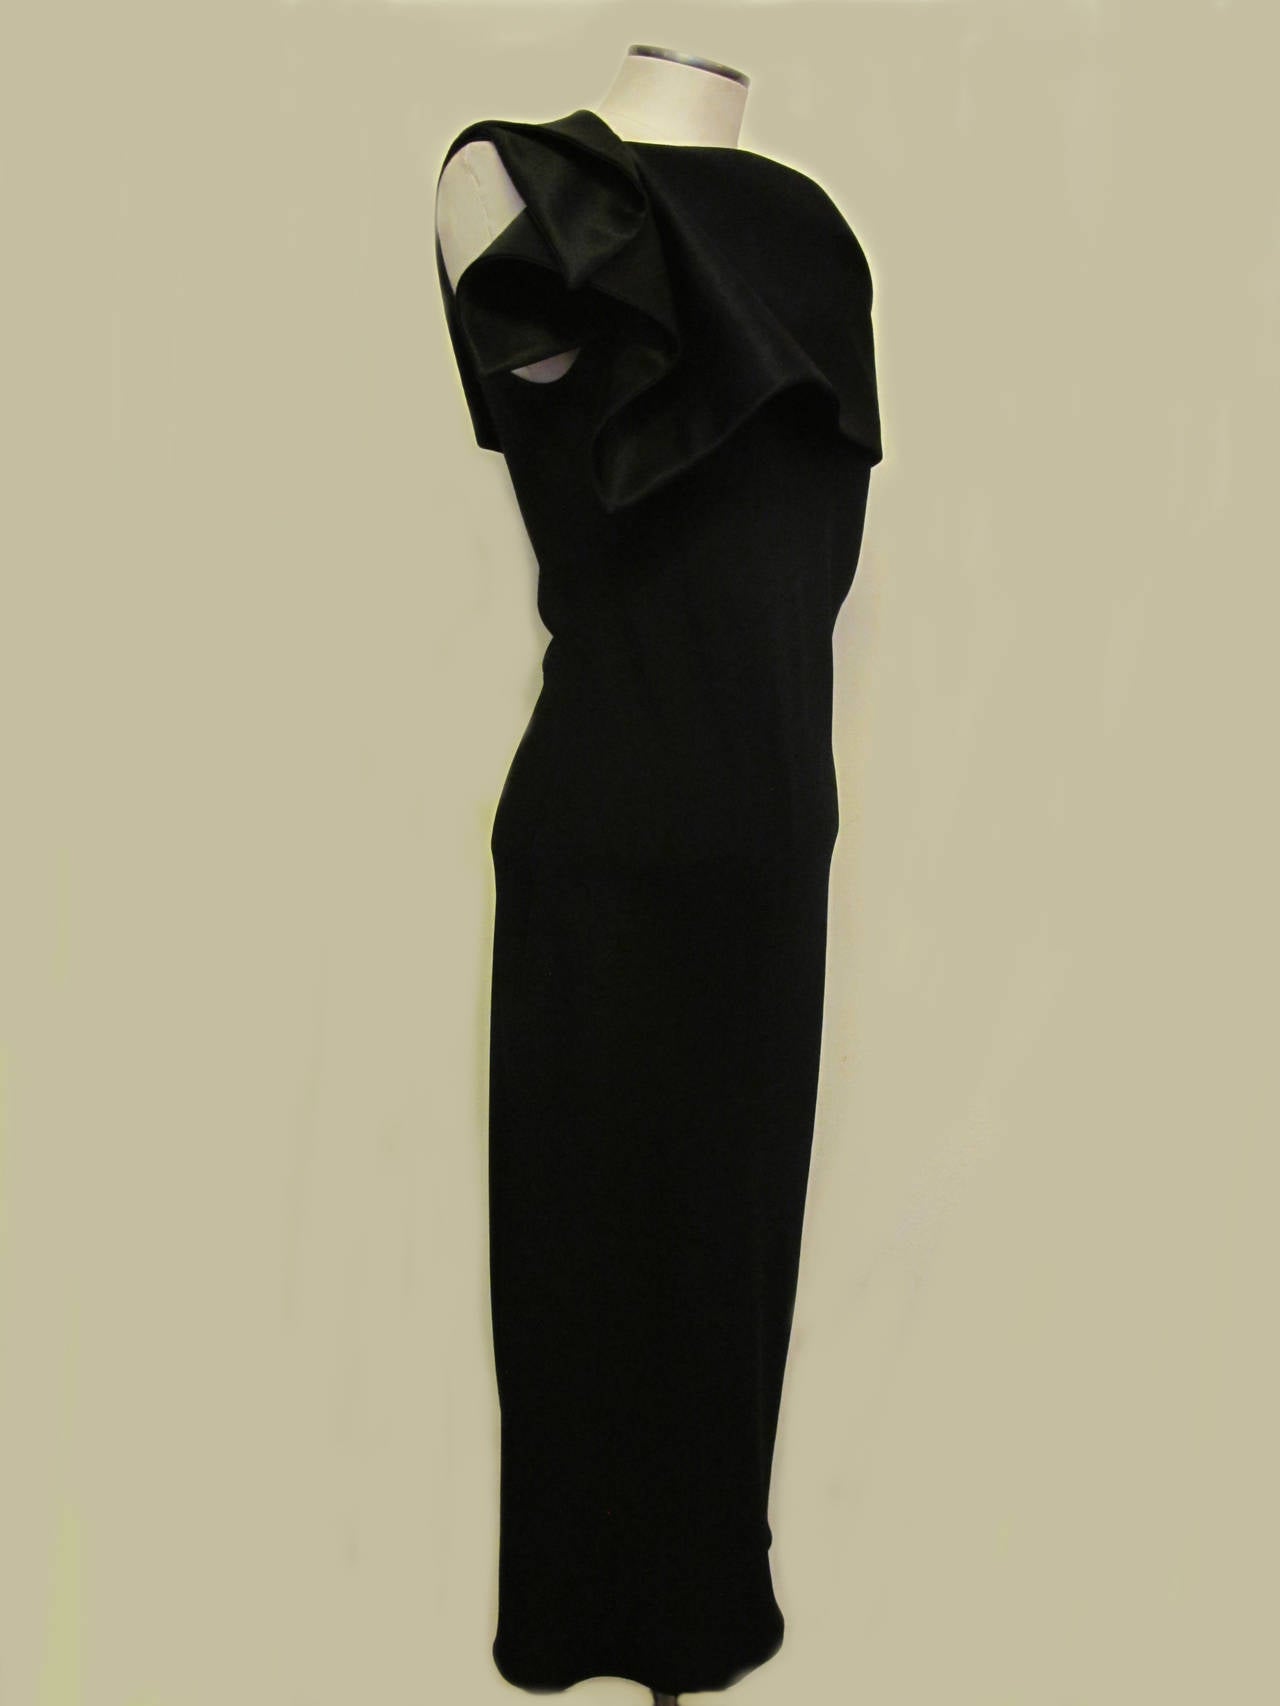 This elegant black asymmetrical black cocktail dress is beyond chic. It is cut on the bias with no waist and hugs the body in heavenly ways. There is a drop shoulder on the left side. The top of the dress is shiny silk and the rest of the dress is